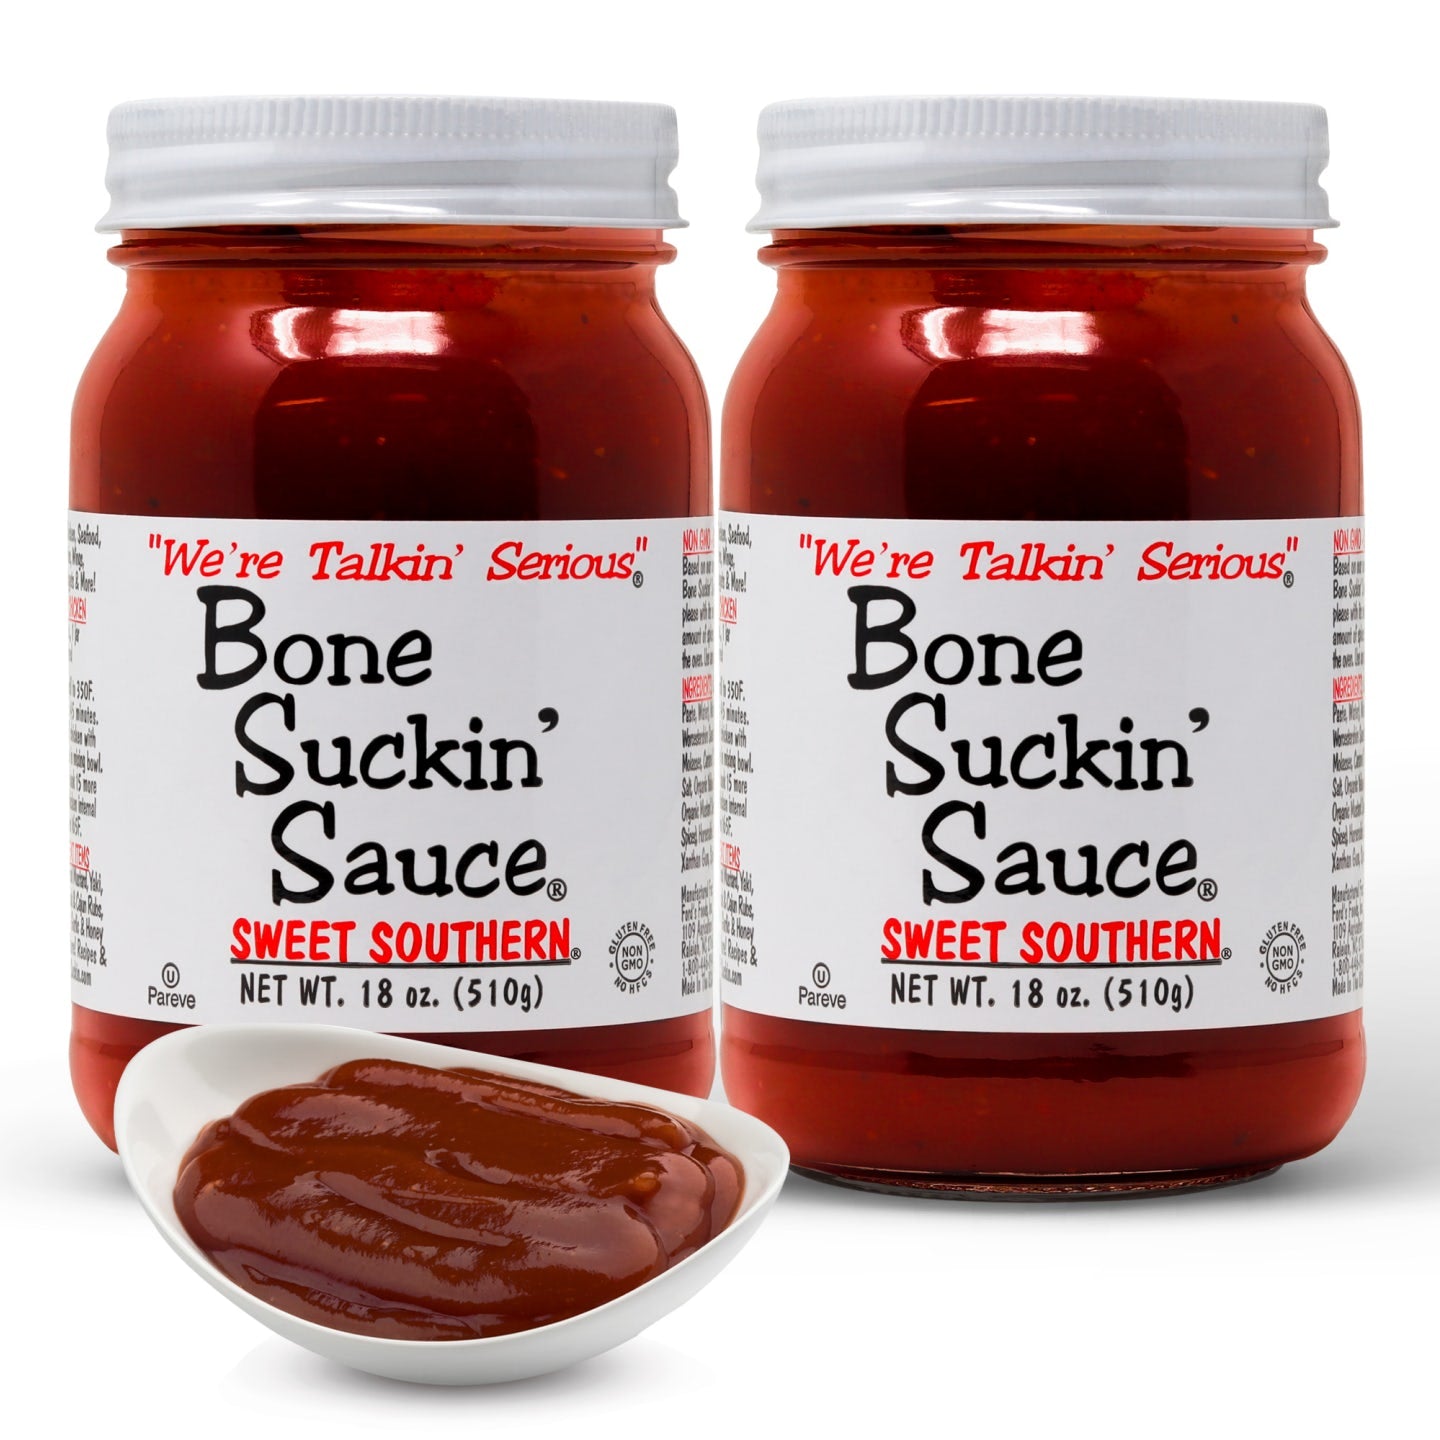 Bone Suckin Sauce Sweet Southern 18oz 2 Pack Bone Suckin' Sauce is the small batch craft barbecue sauce that is 3rd party tested & verified, Made in the USA in glass bottles, beloved by the entire family for its delicuous taste and unmatched versatility. This exceptional sauce is Non-GMO, Gluten-Free, Kosher and has No High Fructose Corn Syrup, offering both health-consciousness and unparalleled taste and quality.